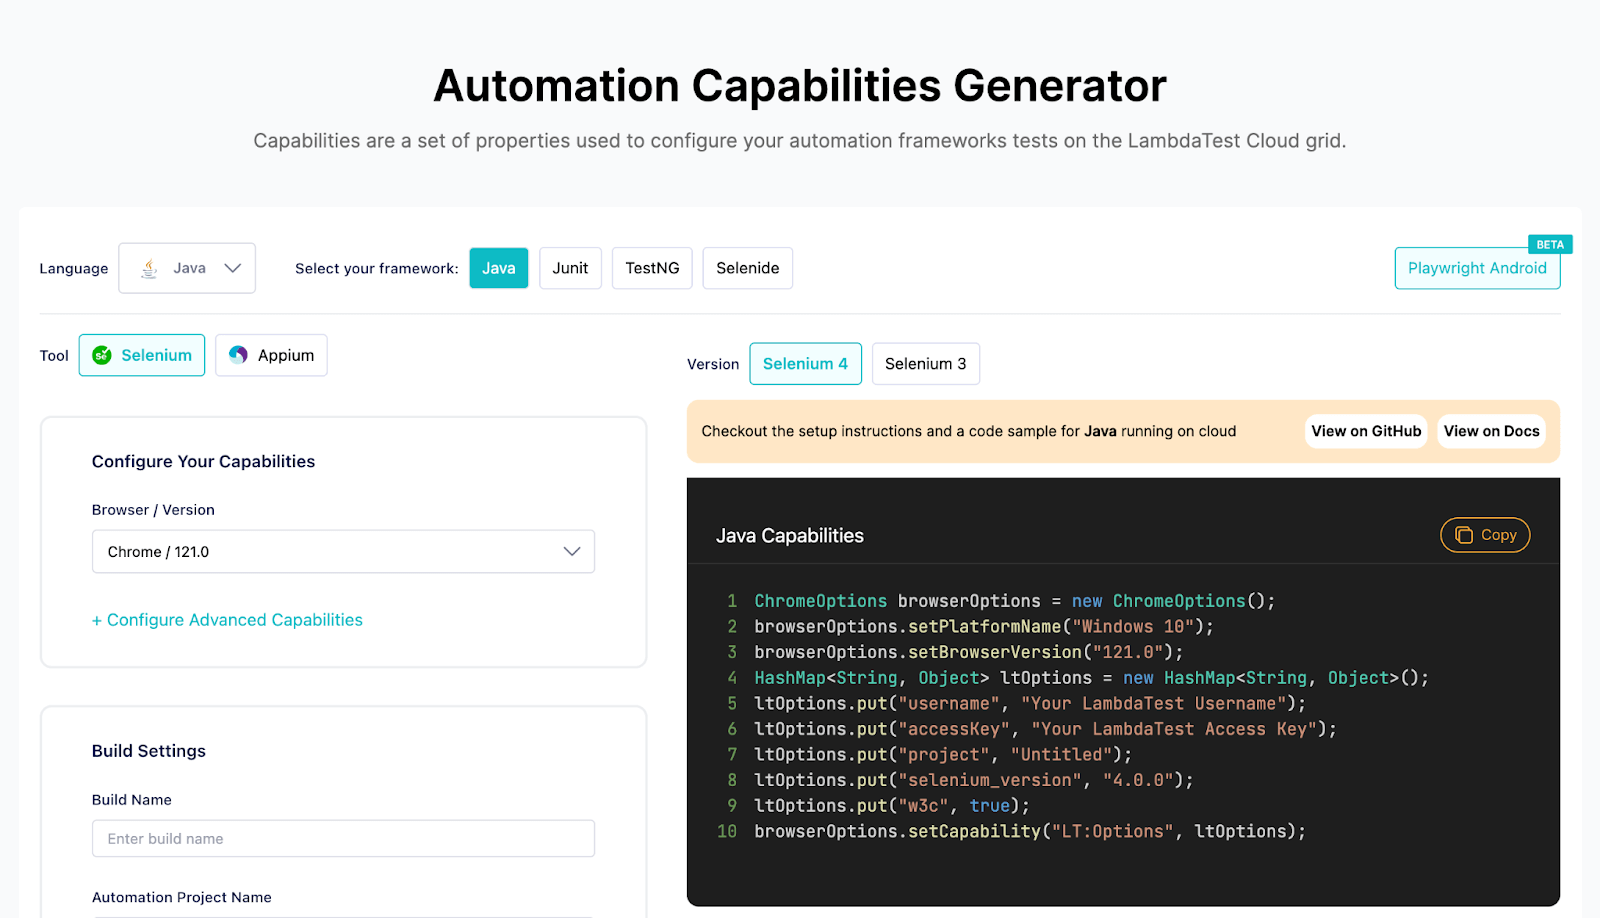 LambdaTest platform by navigating to their Automation Capabilities Generator